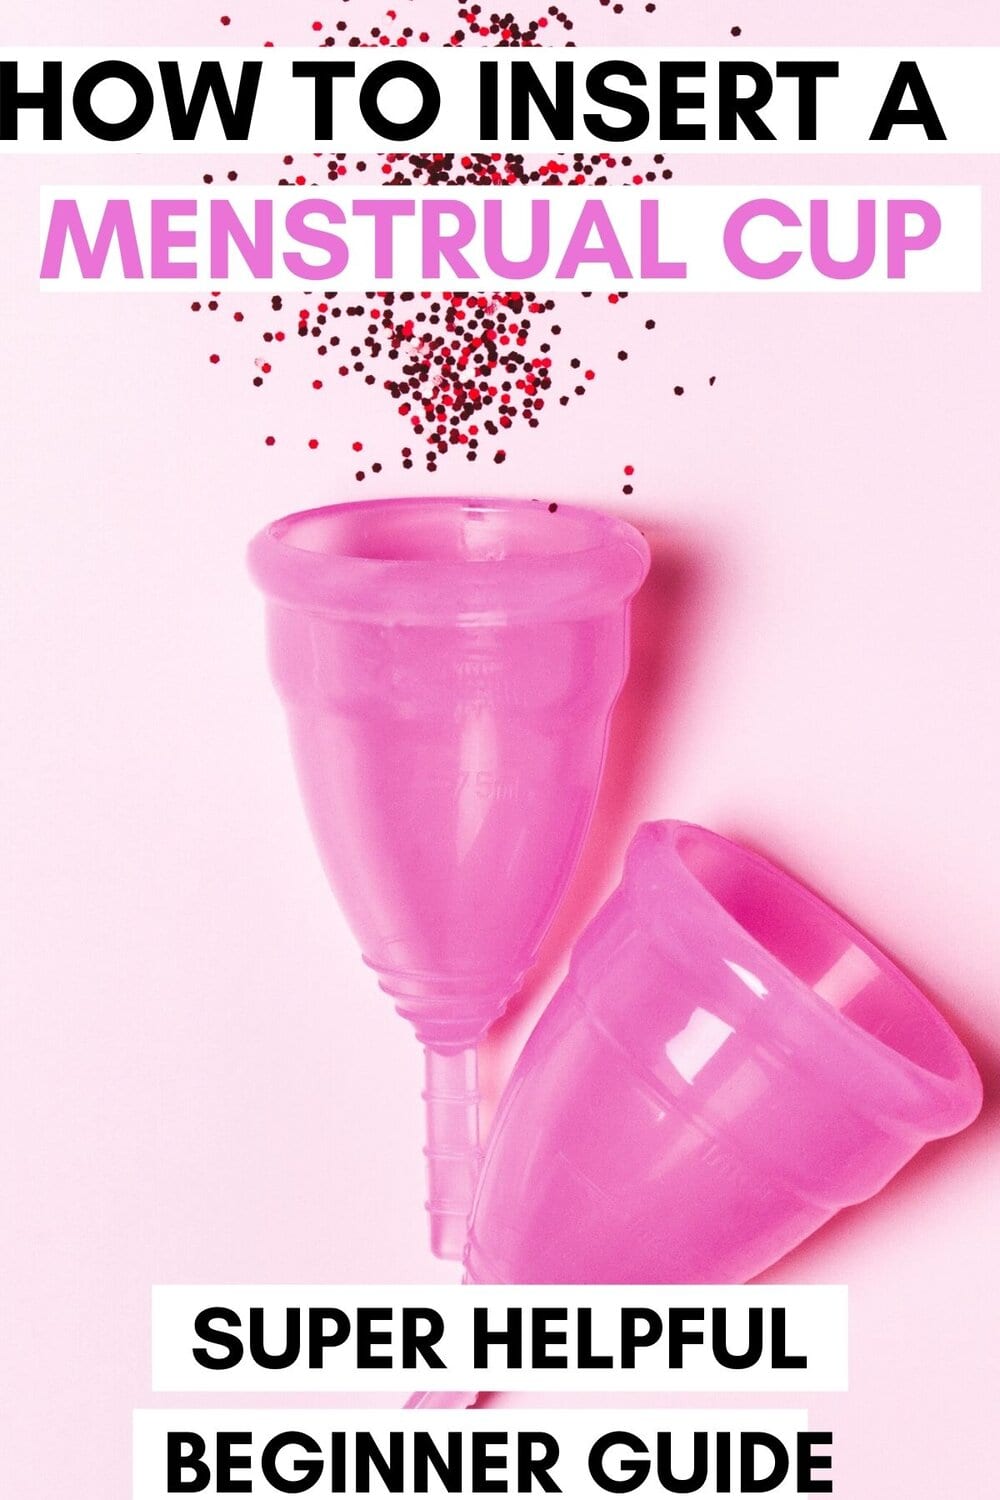 How to insert a menstrual cup guide